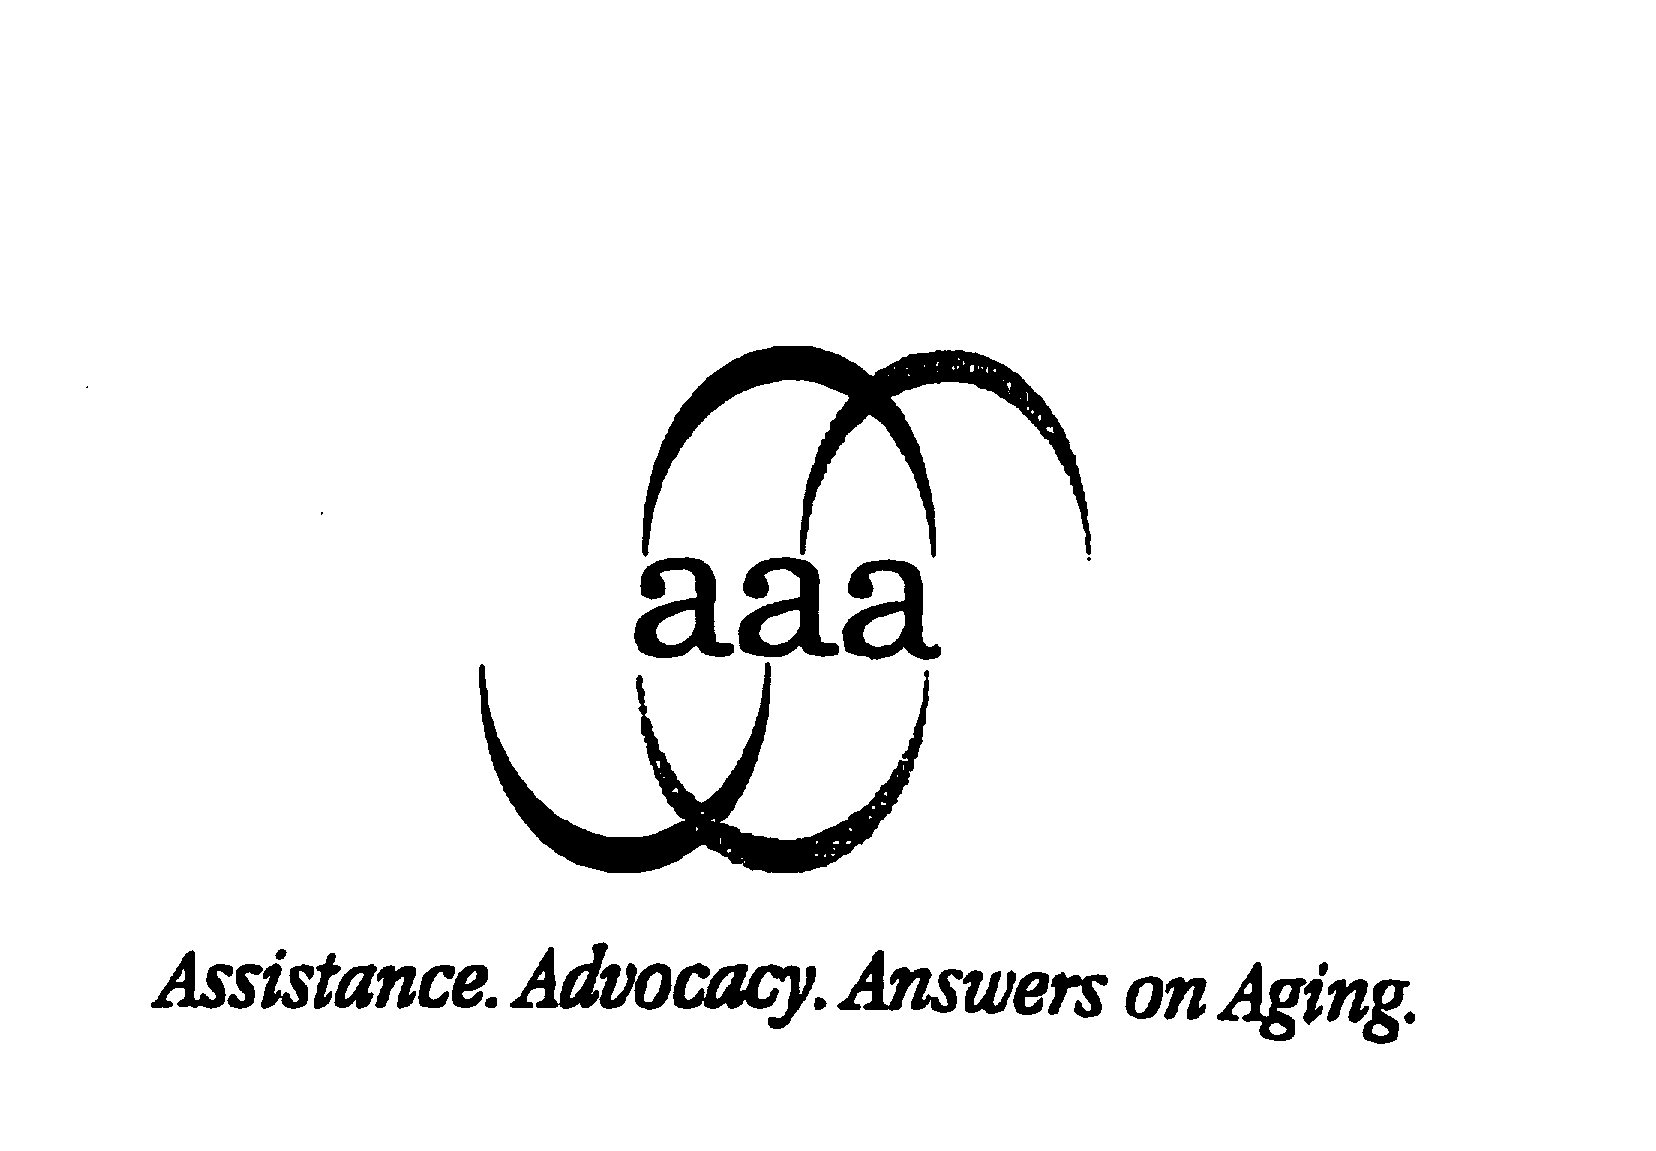  AAA ASSISTANCE.ADVOCACY.ANSWERS ON AGING.